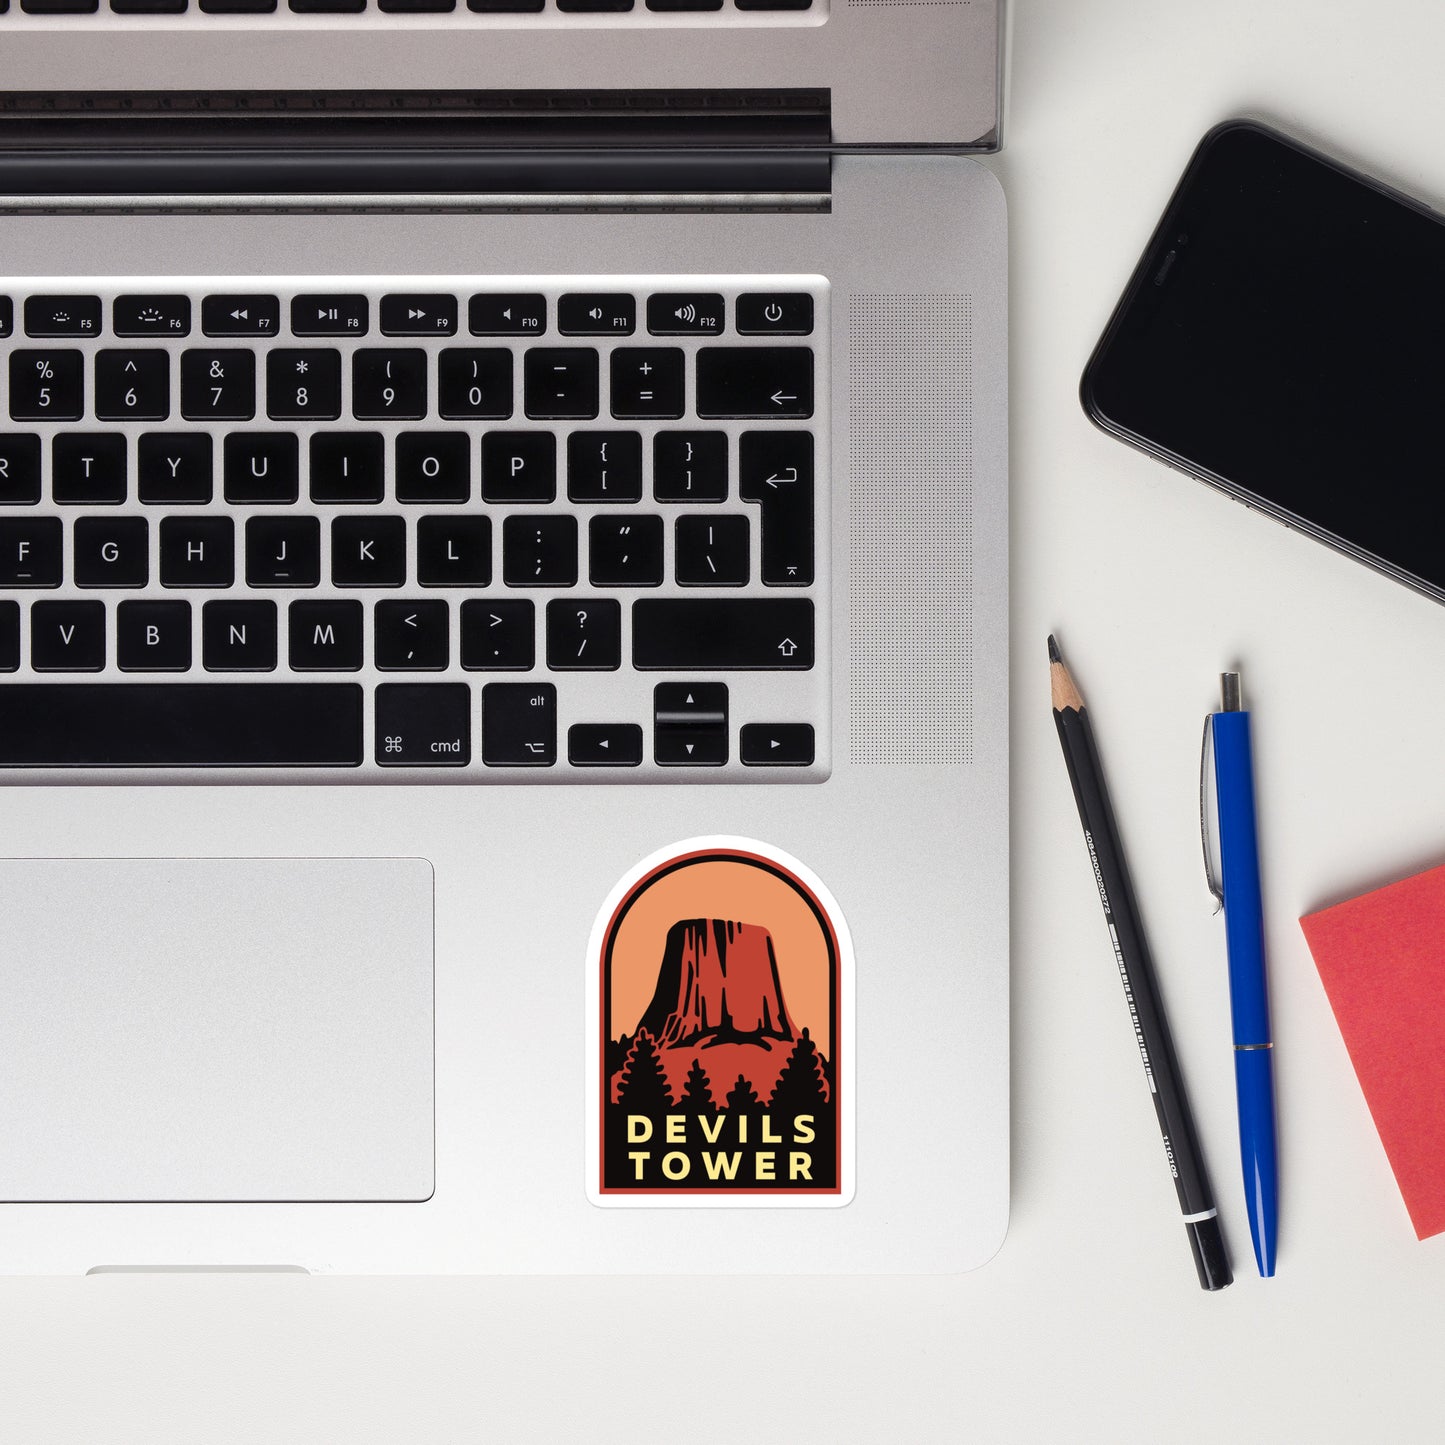 A sticker of Devils Tower Wyoming on a laptop